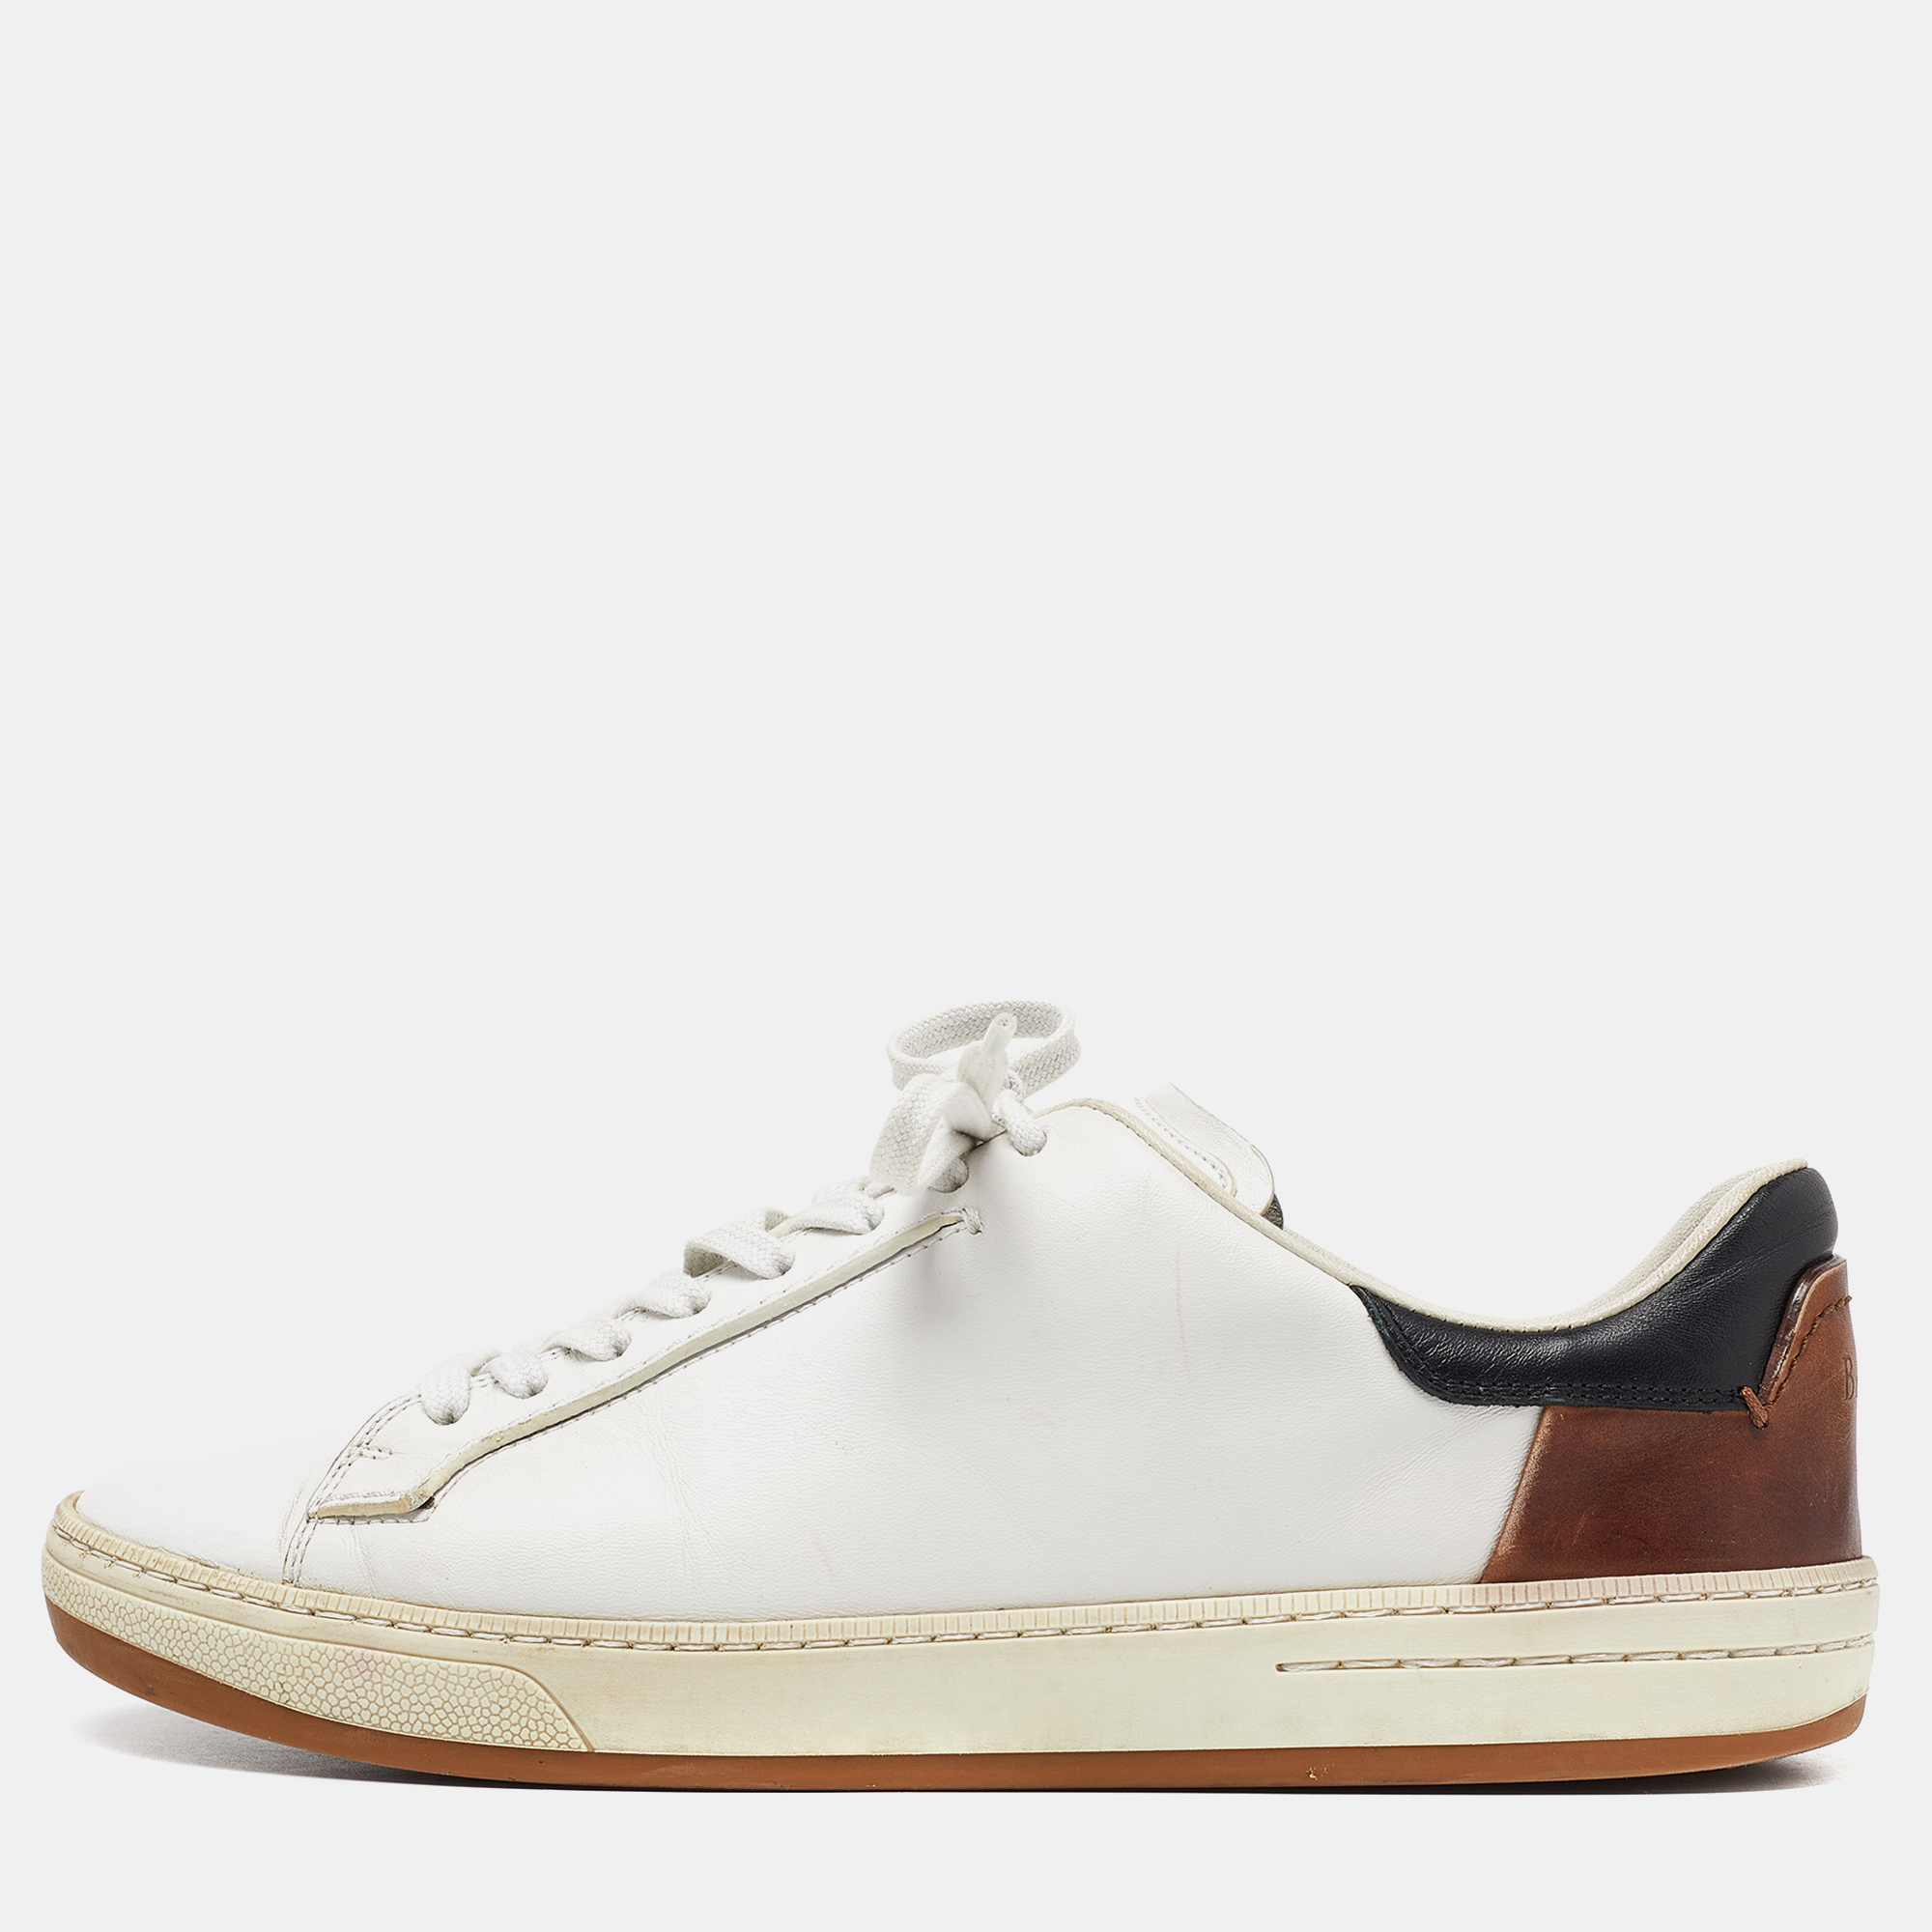 Berluti white/brown leather low top sneakers size 41